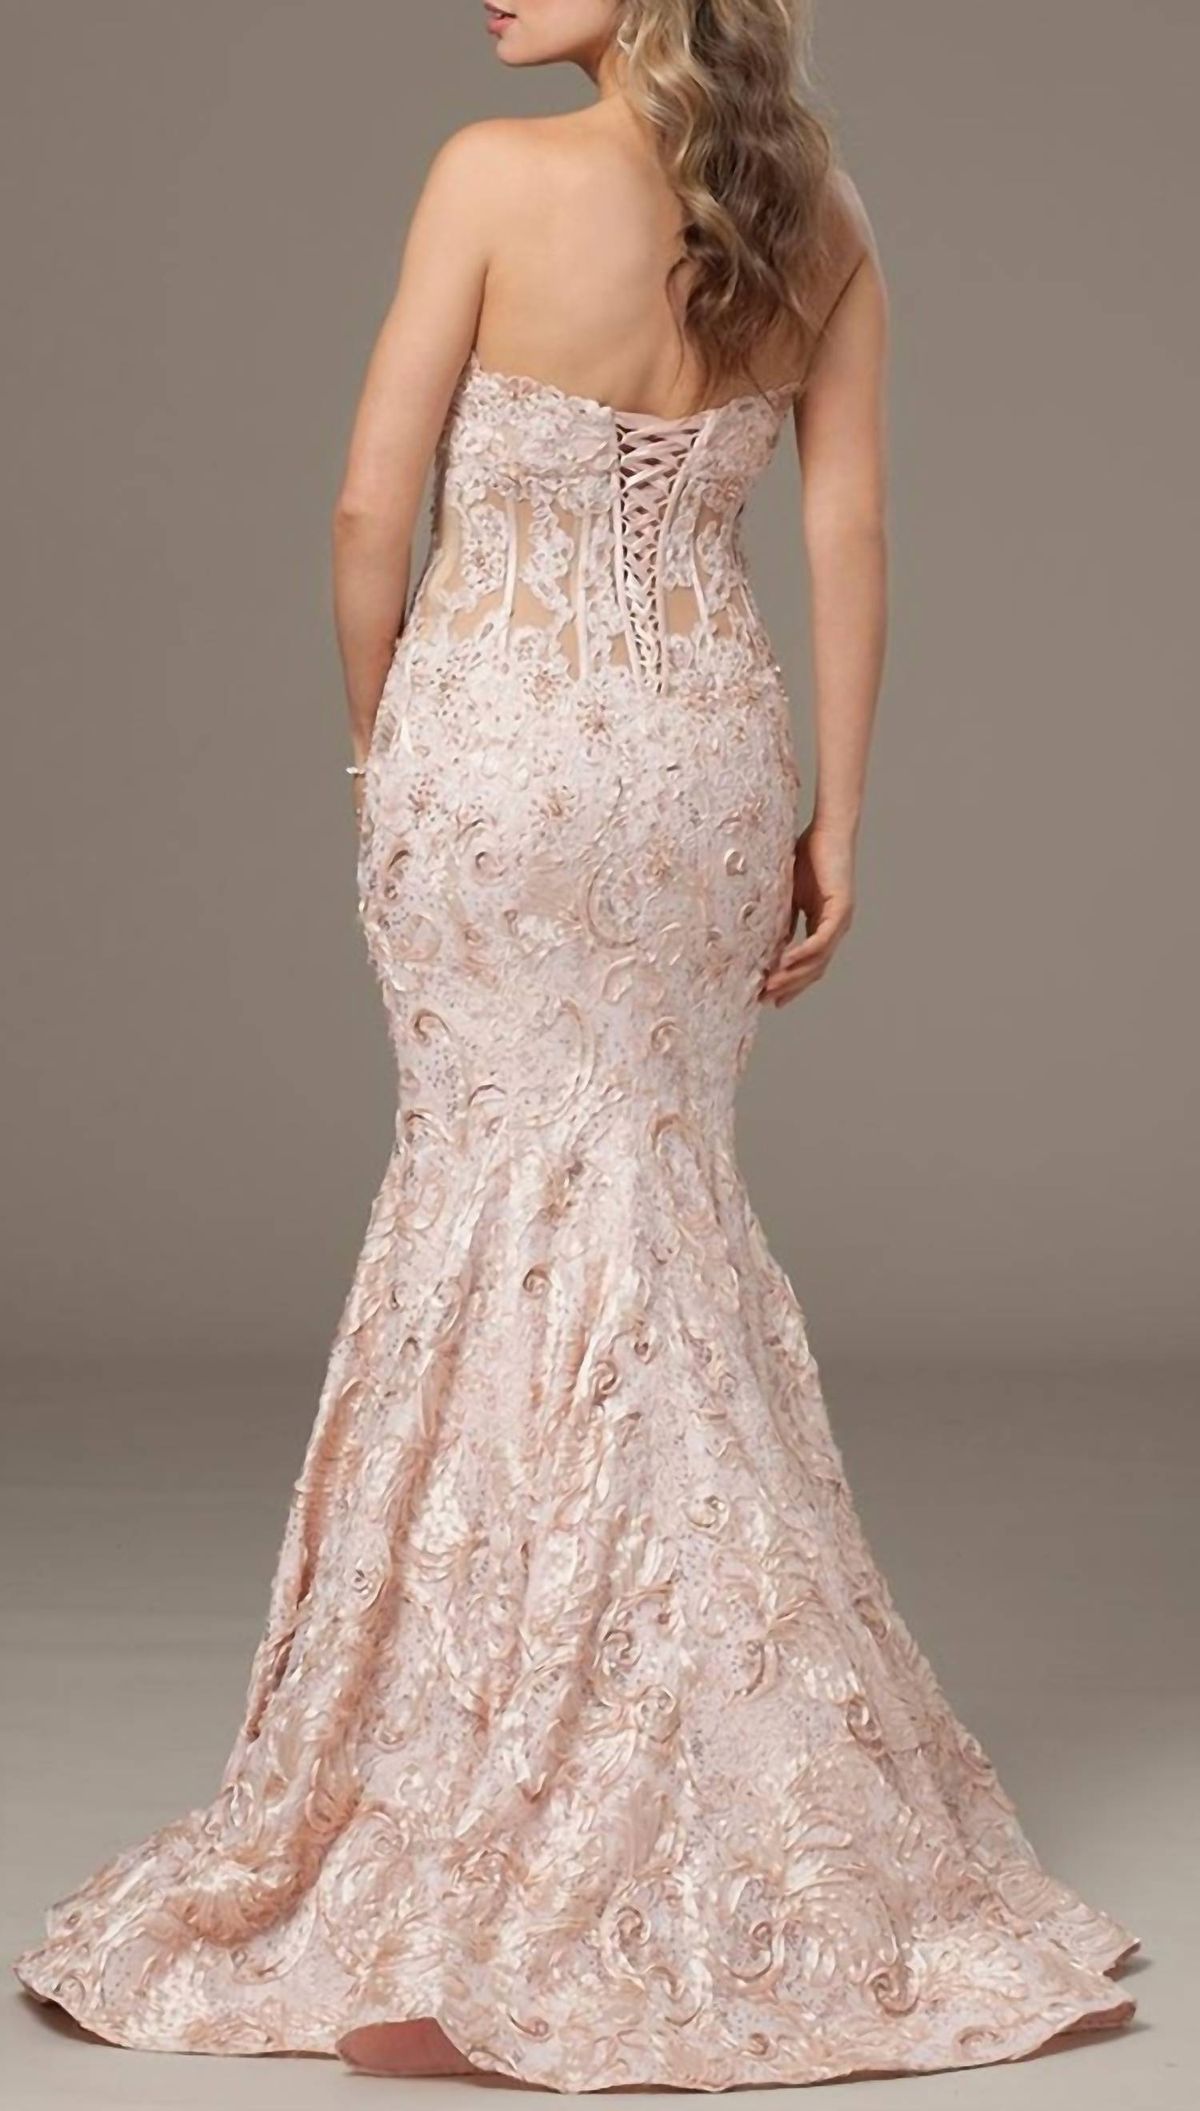 Style 1-4256952725-1901 JOVANI Size 6 Prom Strapless Lace Light Pink Mermaid Dress on Queenly